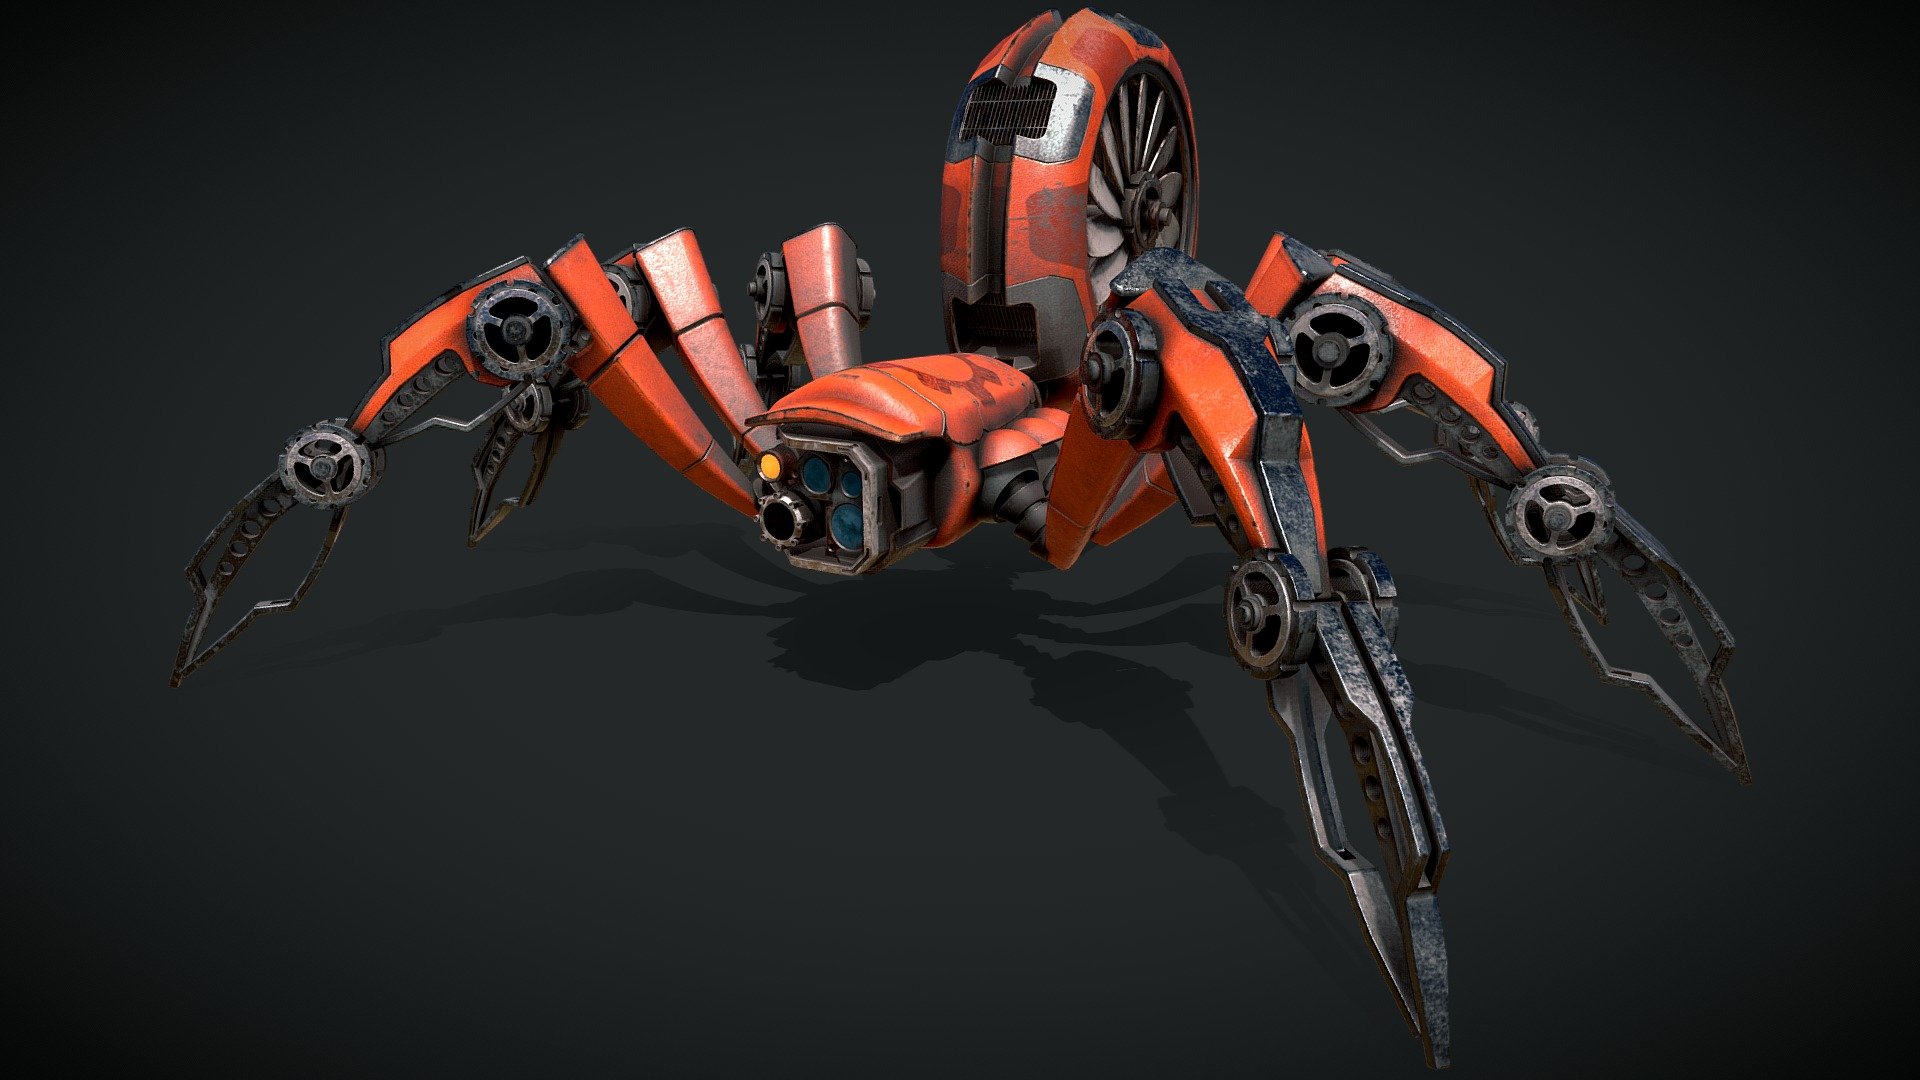 Includes 2x set of 4k textures
Includes rig.
Modeled in Blender and textured in Substance painter.

Robo Bugs Showreel:
https://www.artstation.com/artwork/1x9ZzX - Robo Spider - Download Free 3D model by Vetech82 3d model